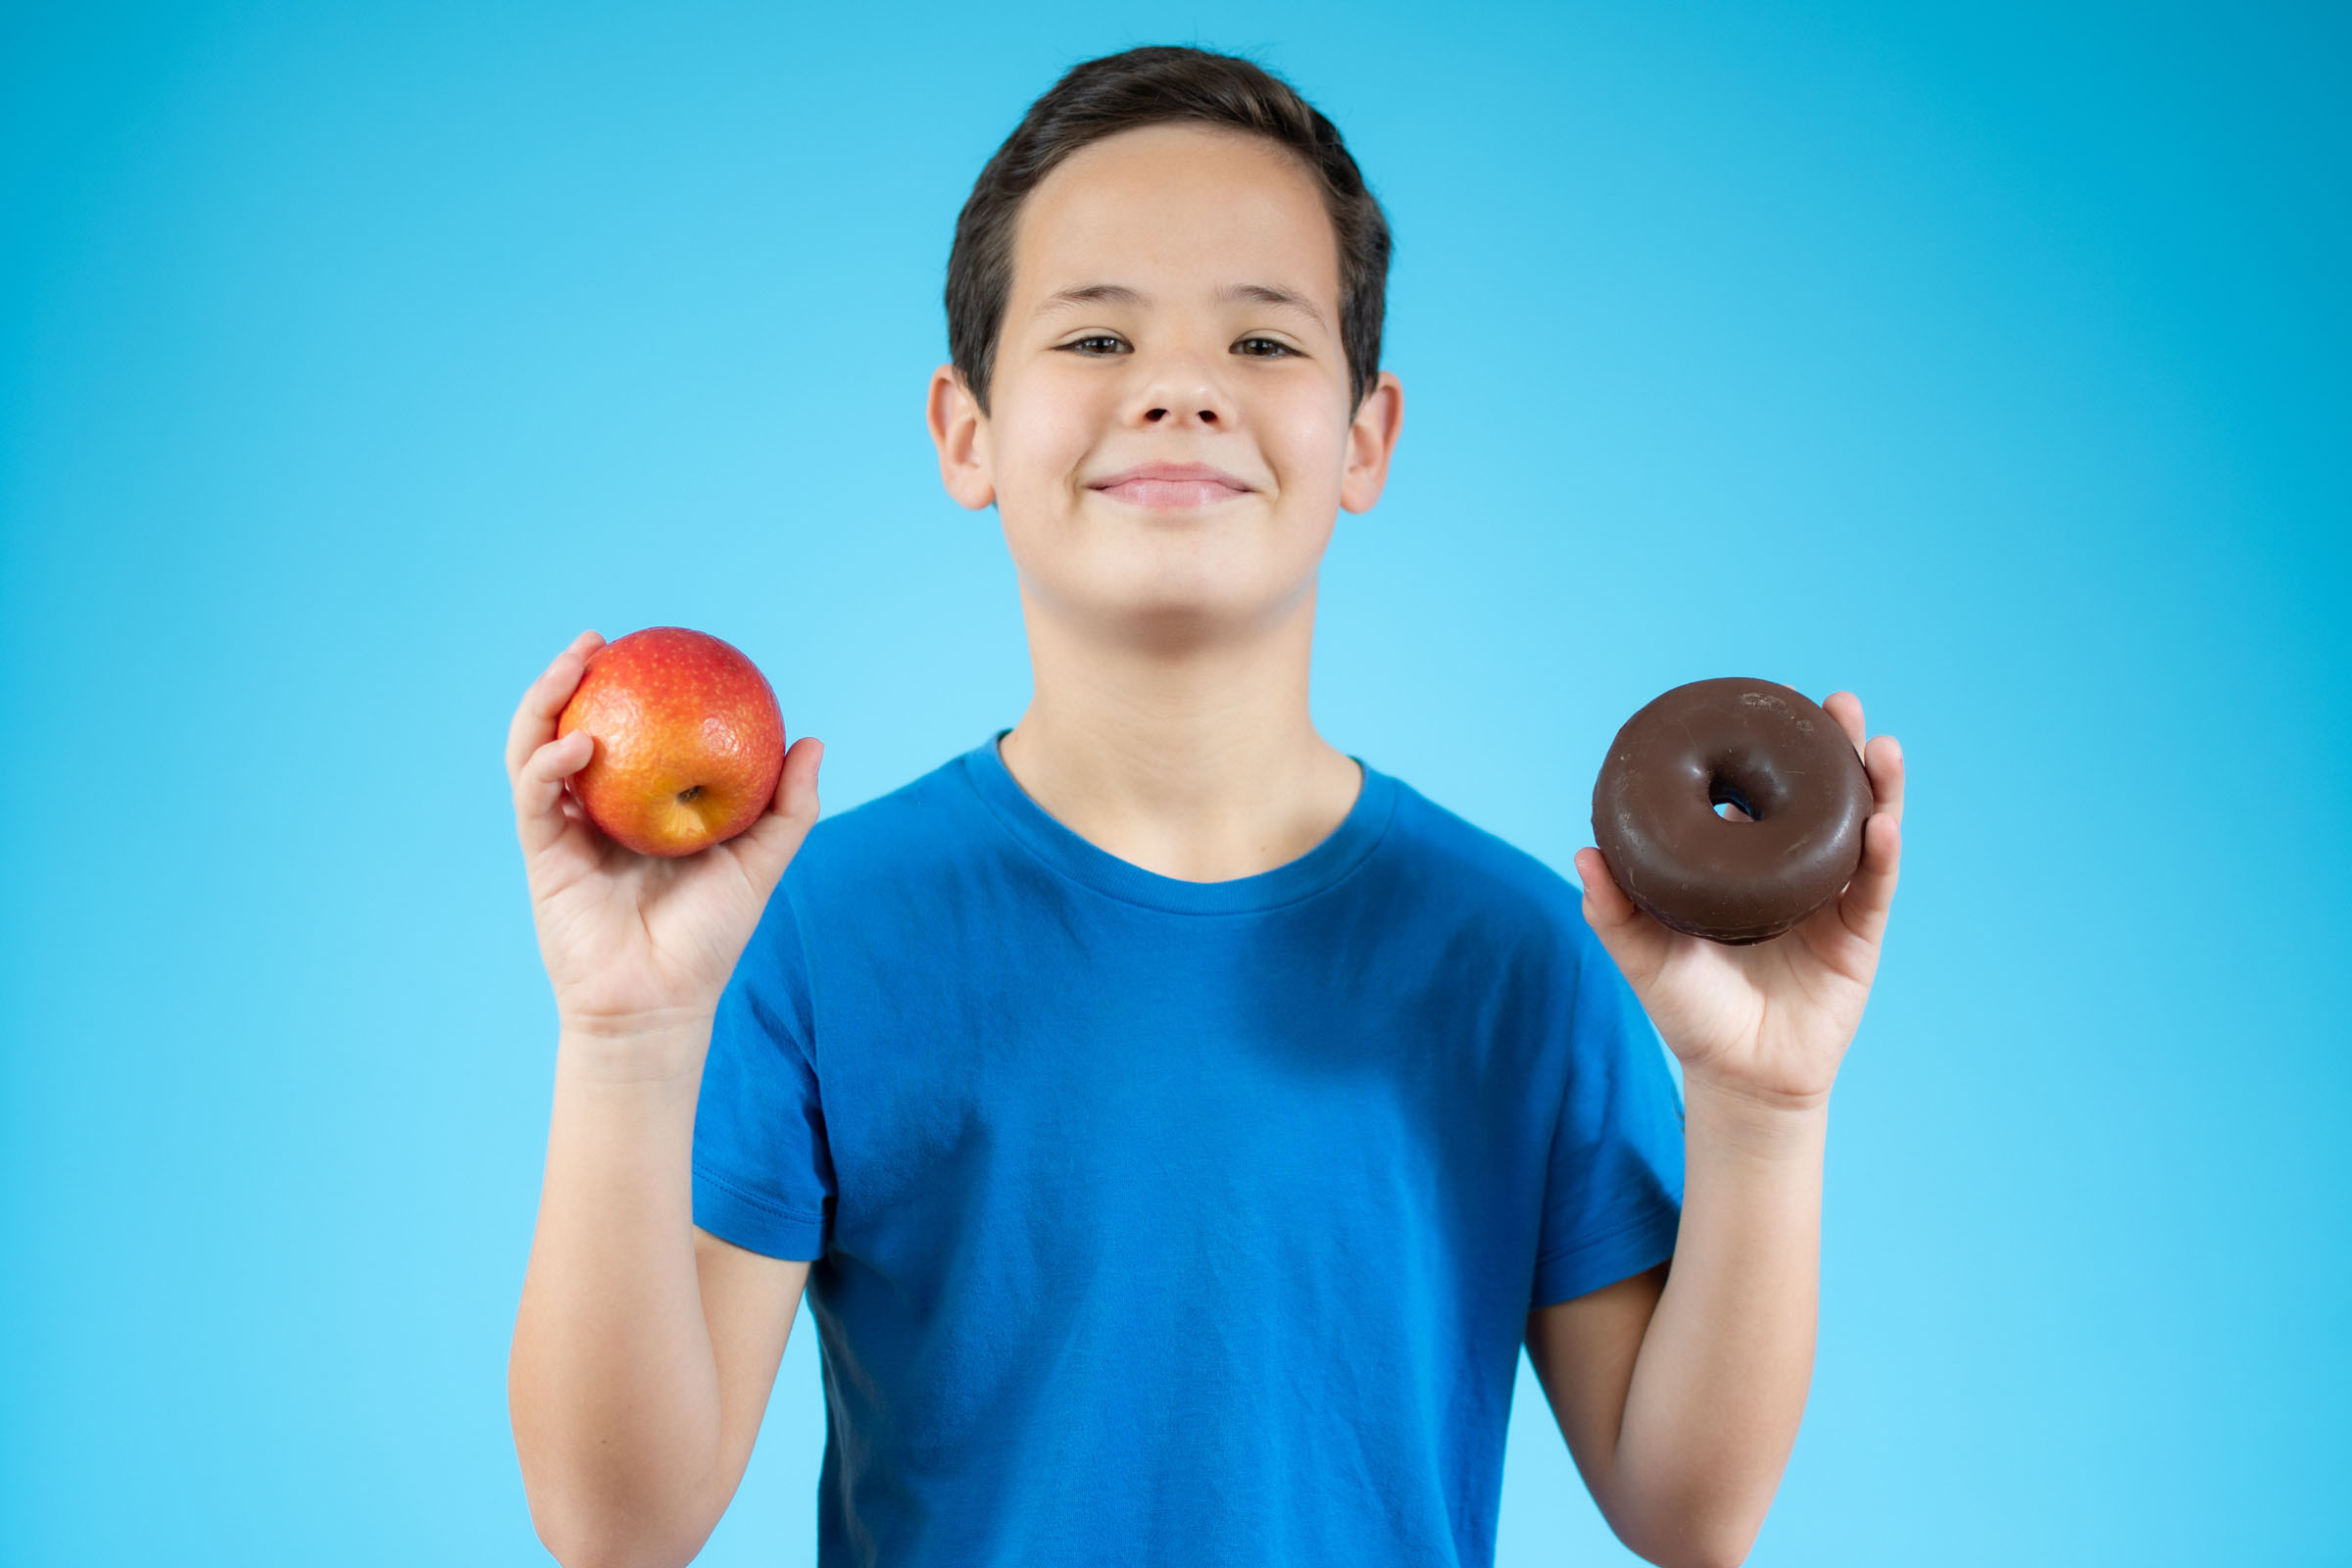 Young boy choosing between an apple and donuts